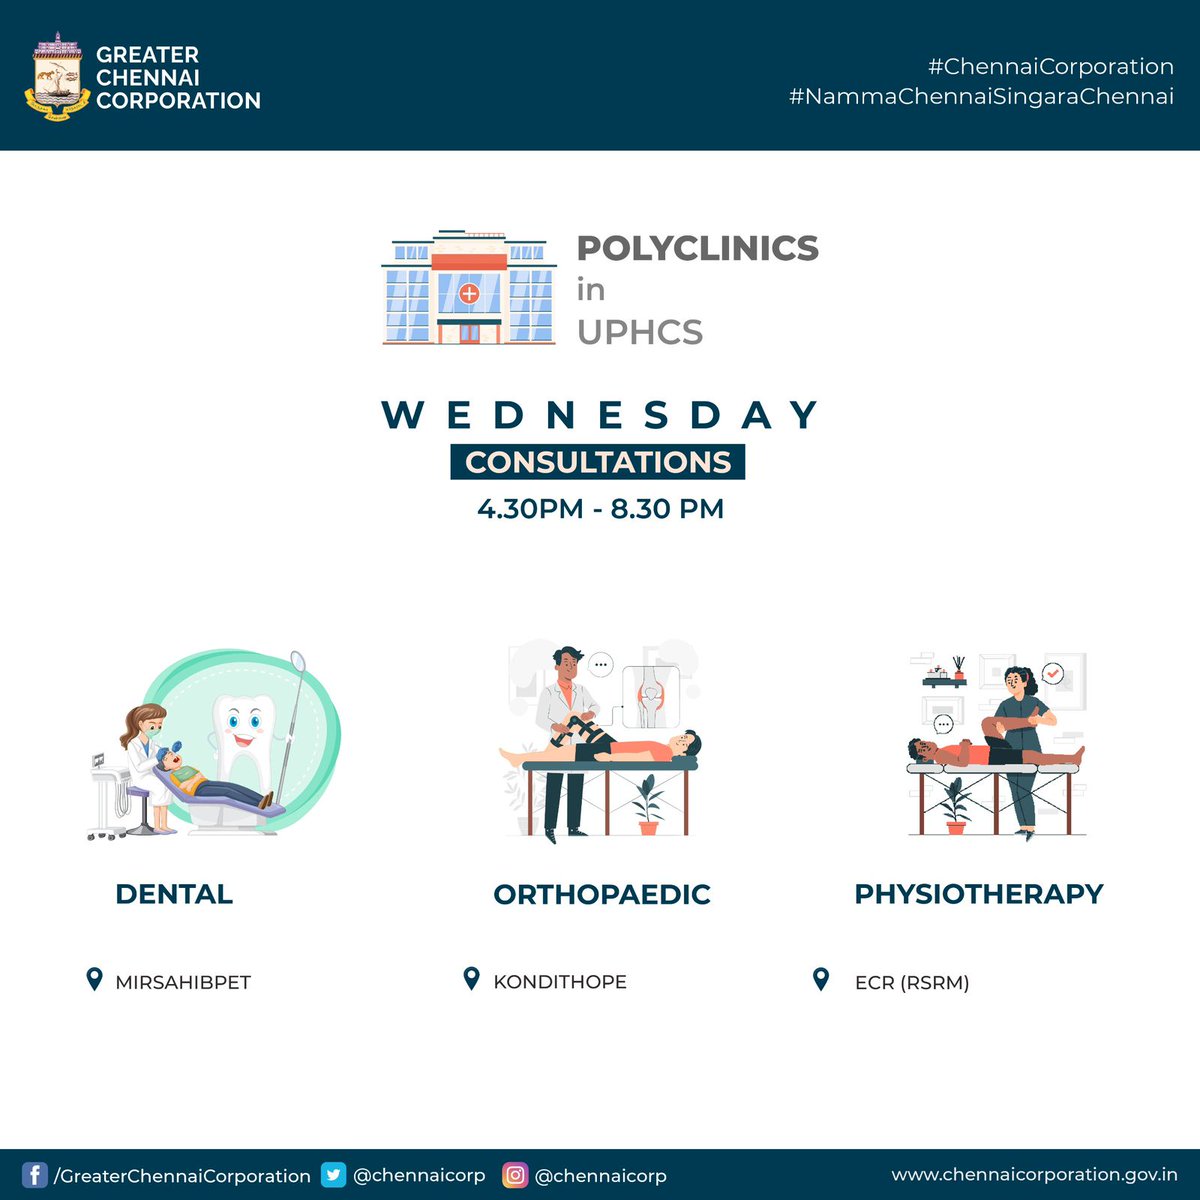 Dear #Chennai, The following #GCC Polyclinics open for various specialised consultations from 4:30 PM to 8:30 PM. Visit to take a step towards better health! @RAKRI1 #ChennaiCorporation #NalamiguChennai